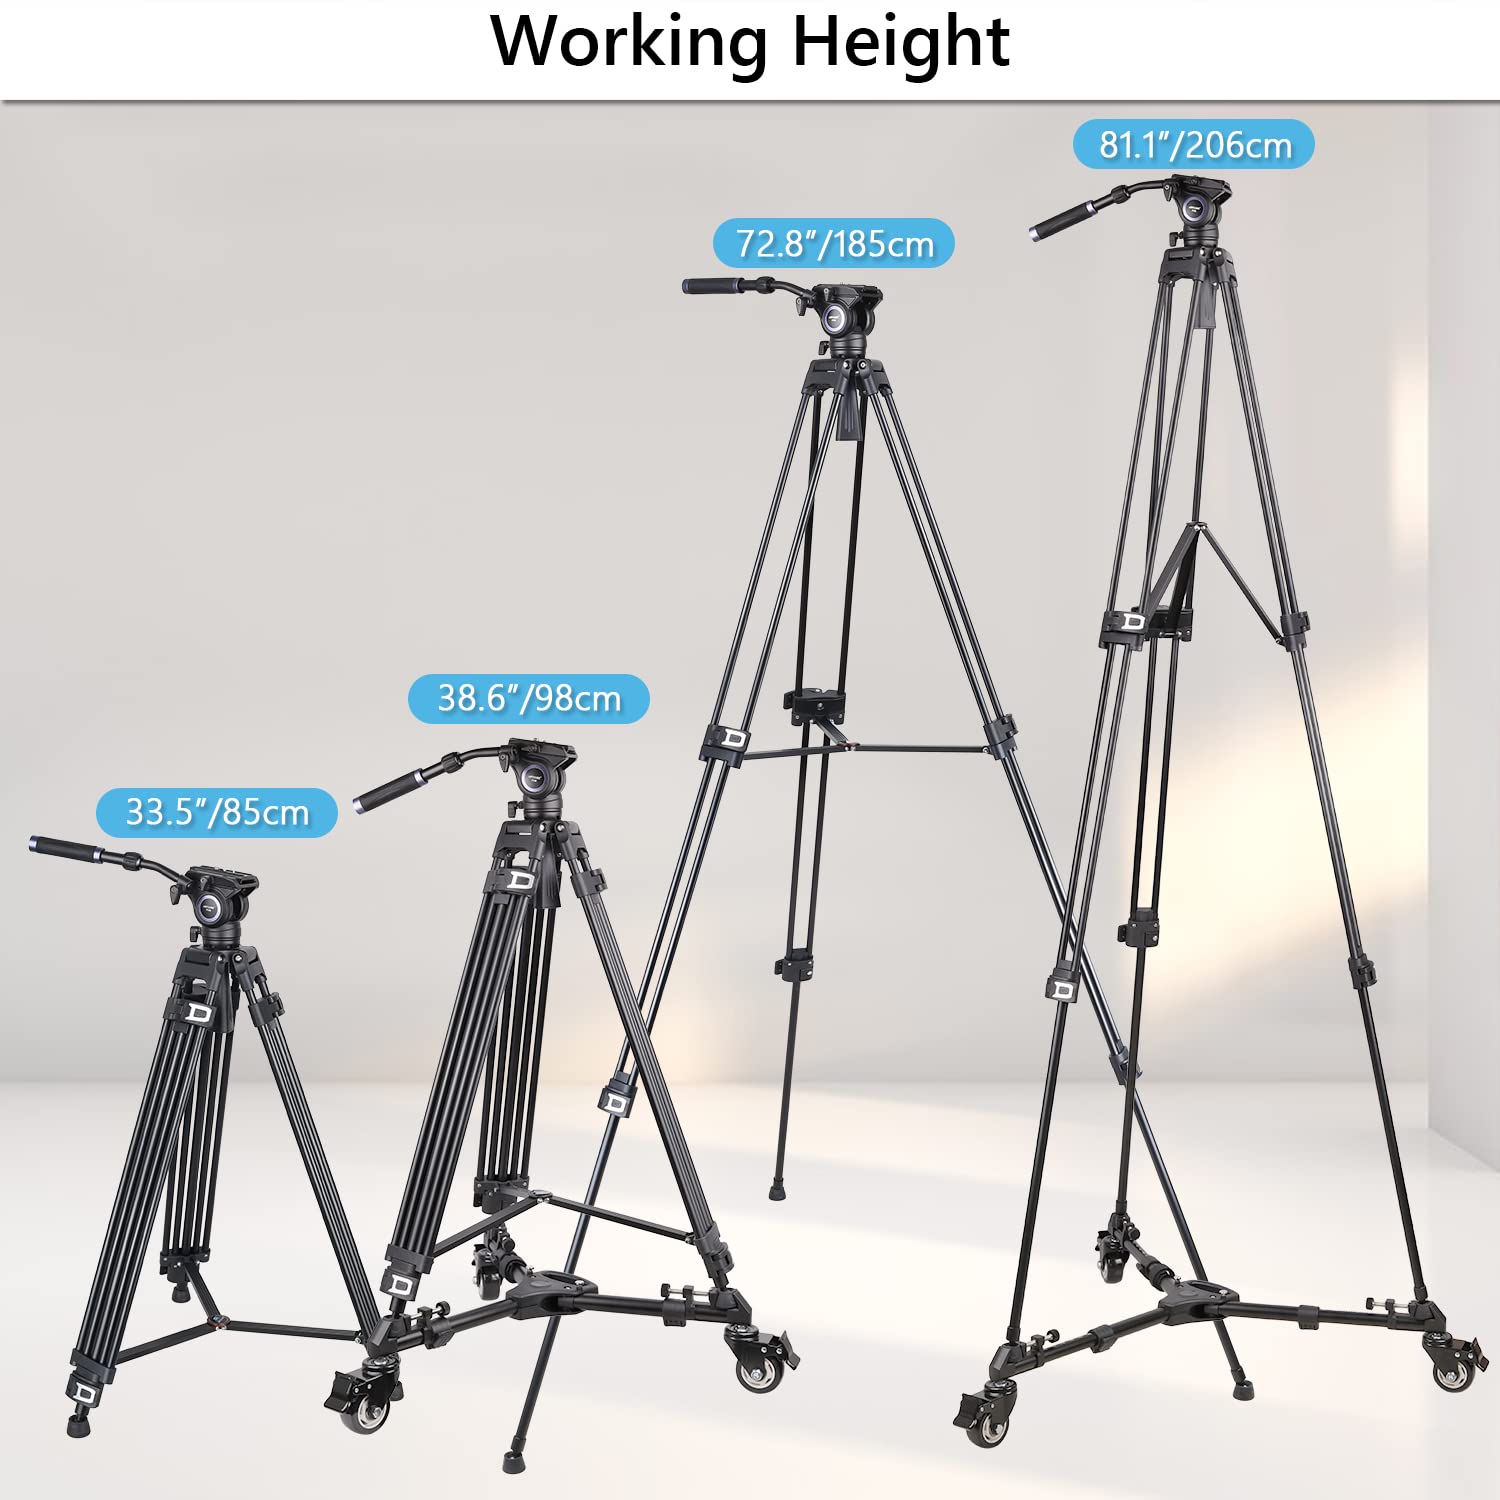 Video Tripod with Heavy Duty Tripod Dolly ARTCISE Professional Heavy Duty Tripod for DSLR Cameras Video Camcorders, Load Capacity Up to 20 Pounds …